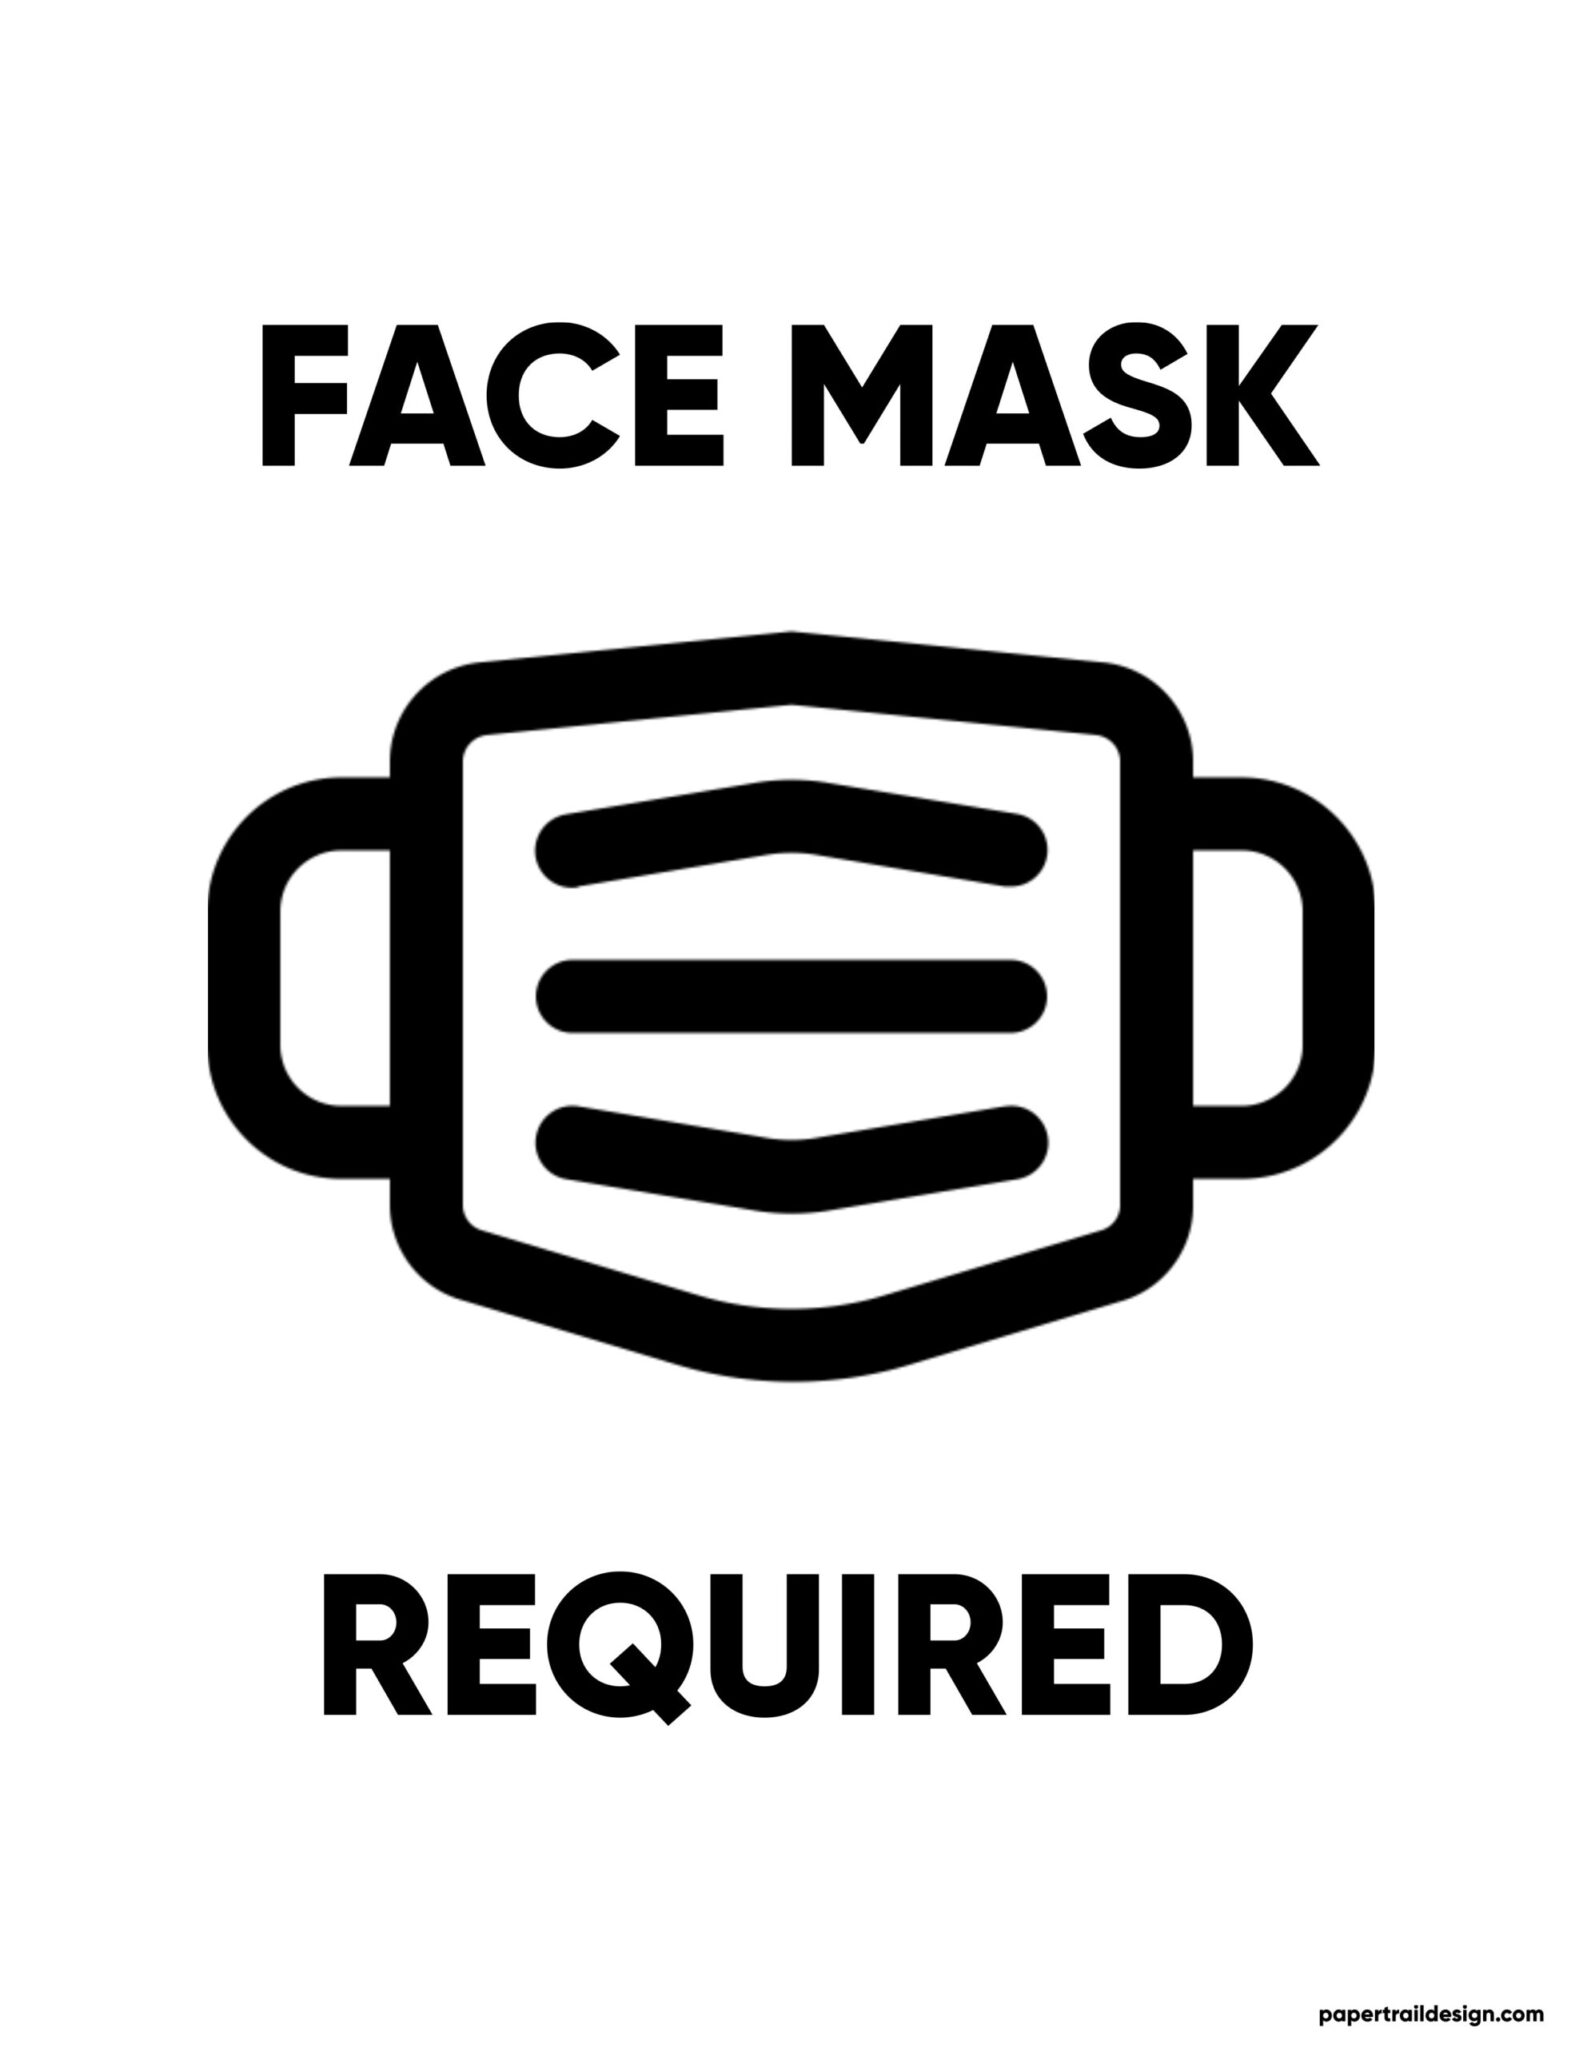 free-printable-face-mask-required-sign-paper-trail-design